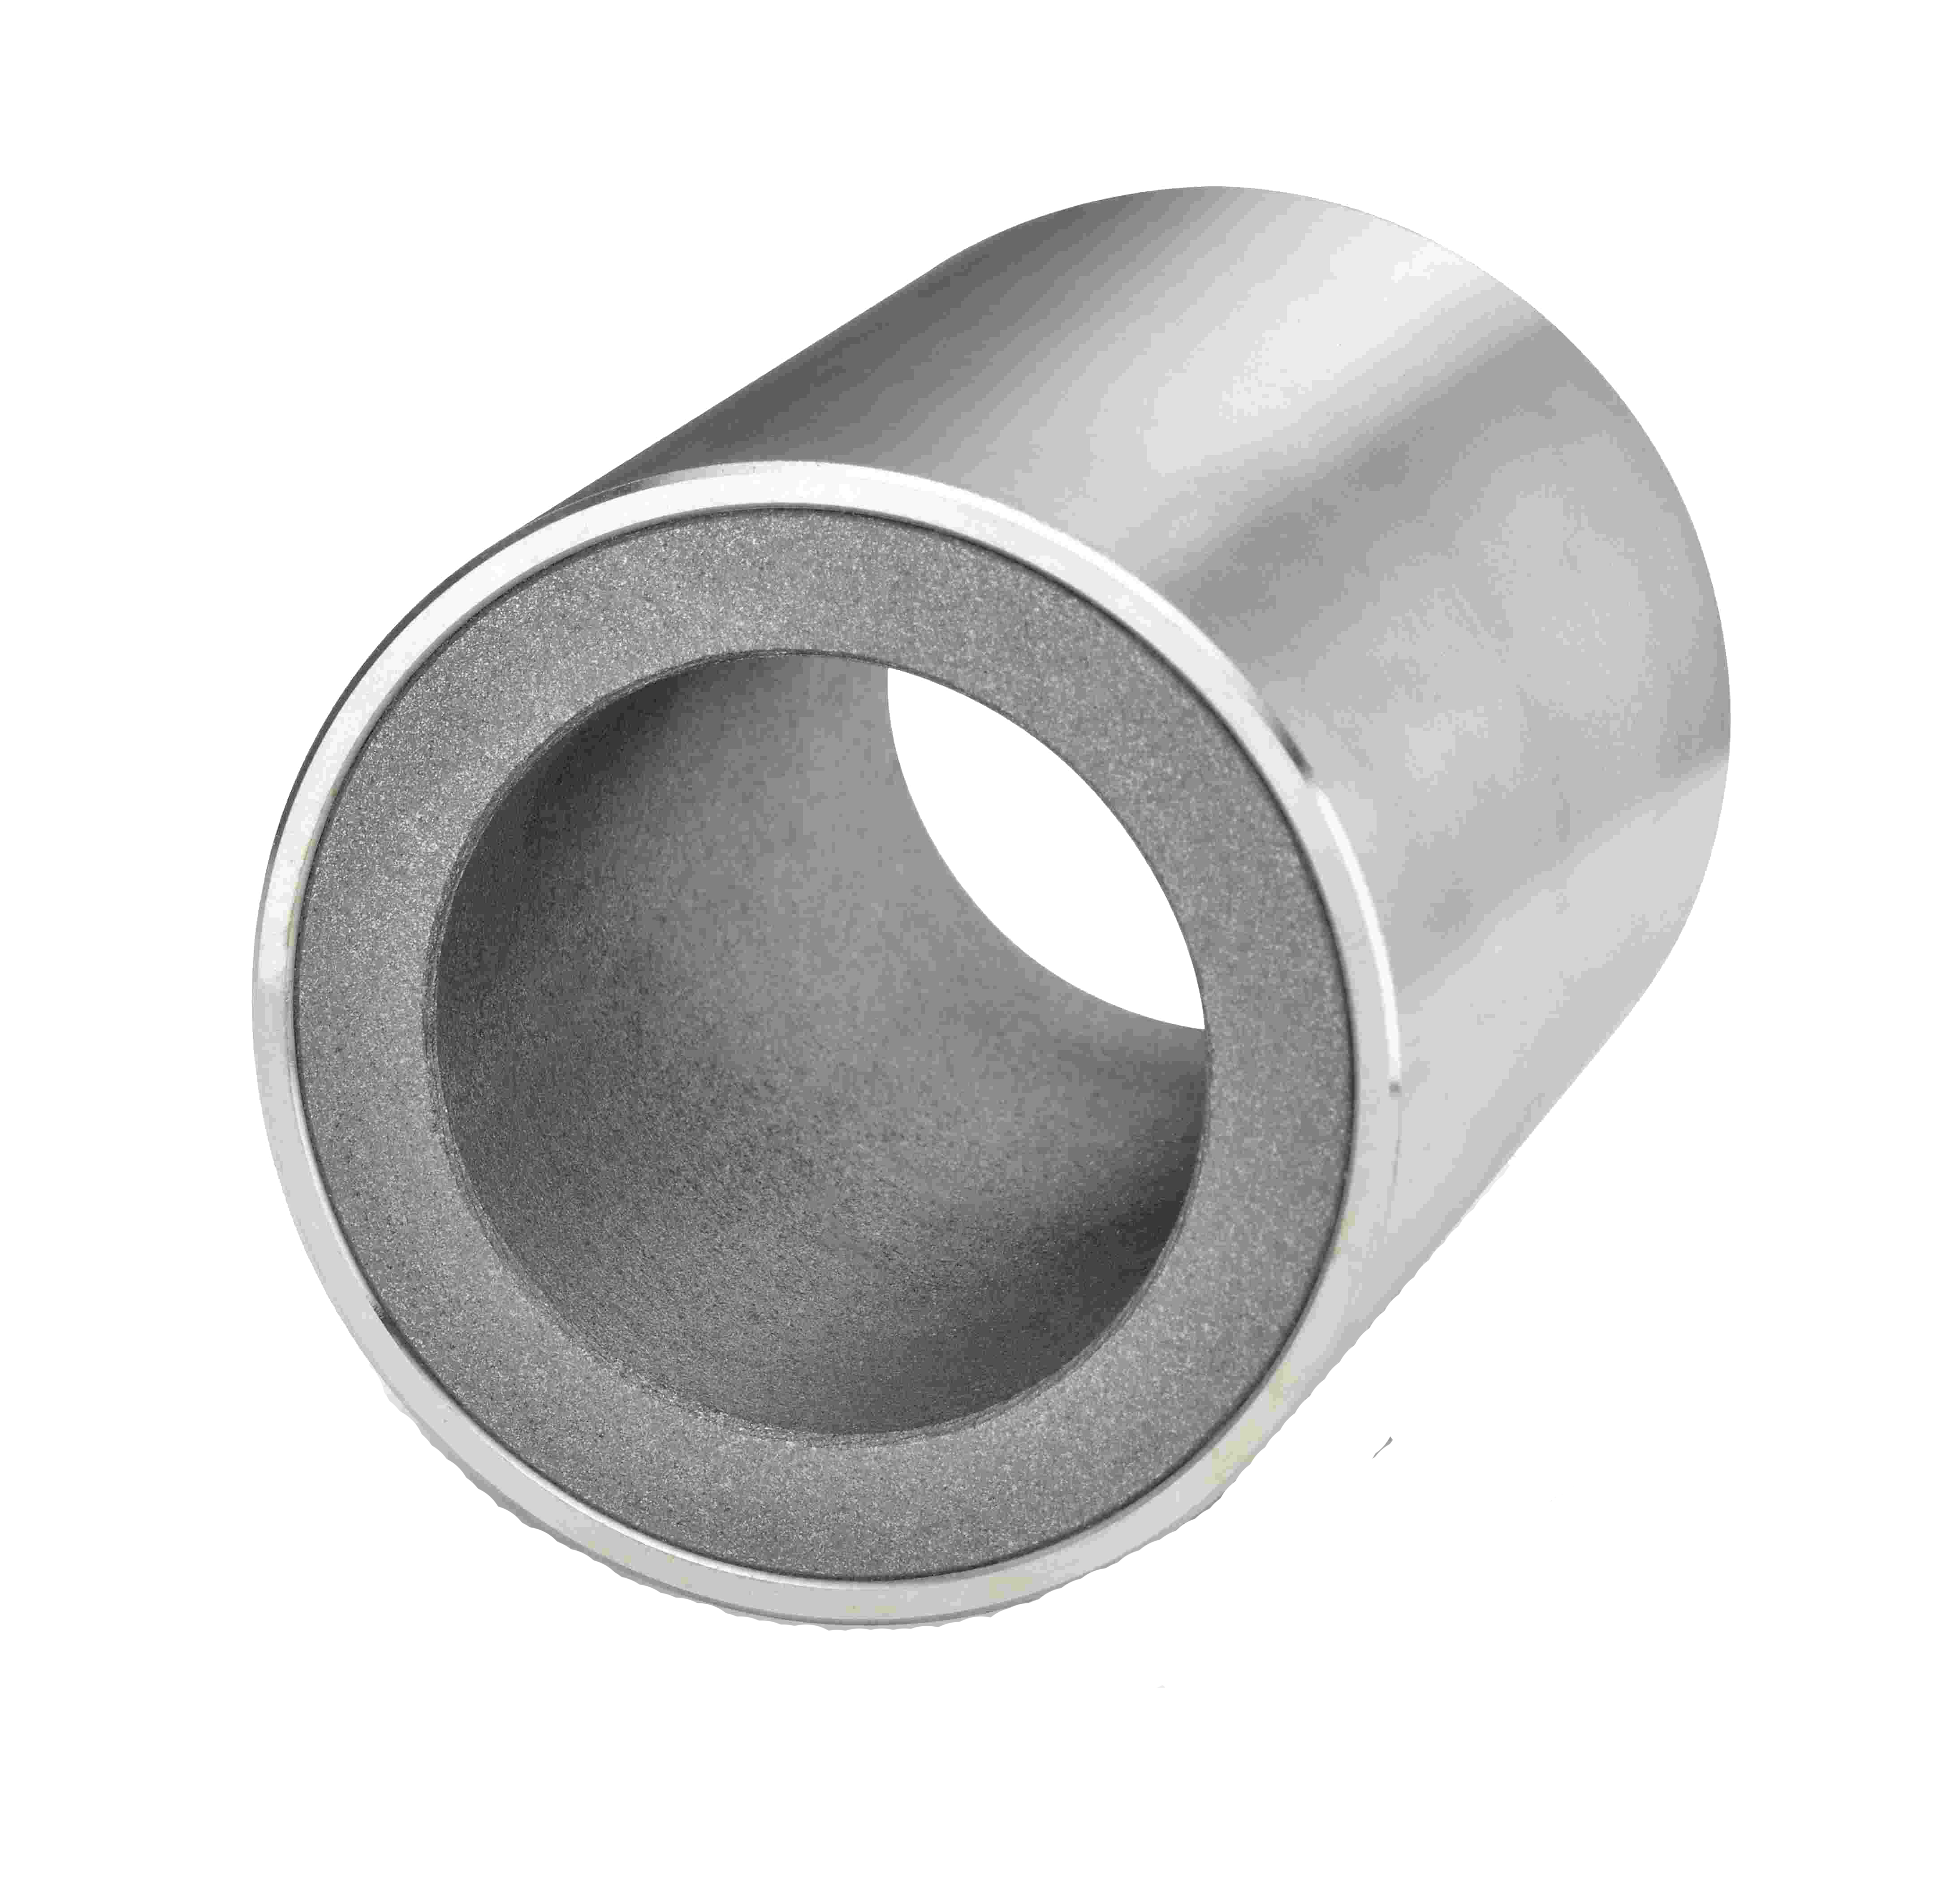 Bearings for drinking water applications